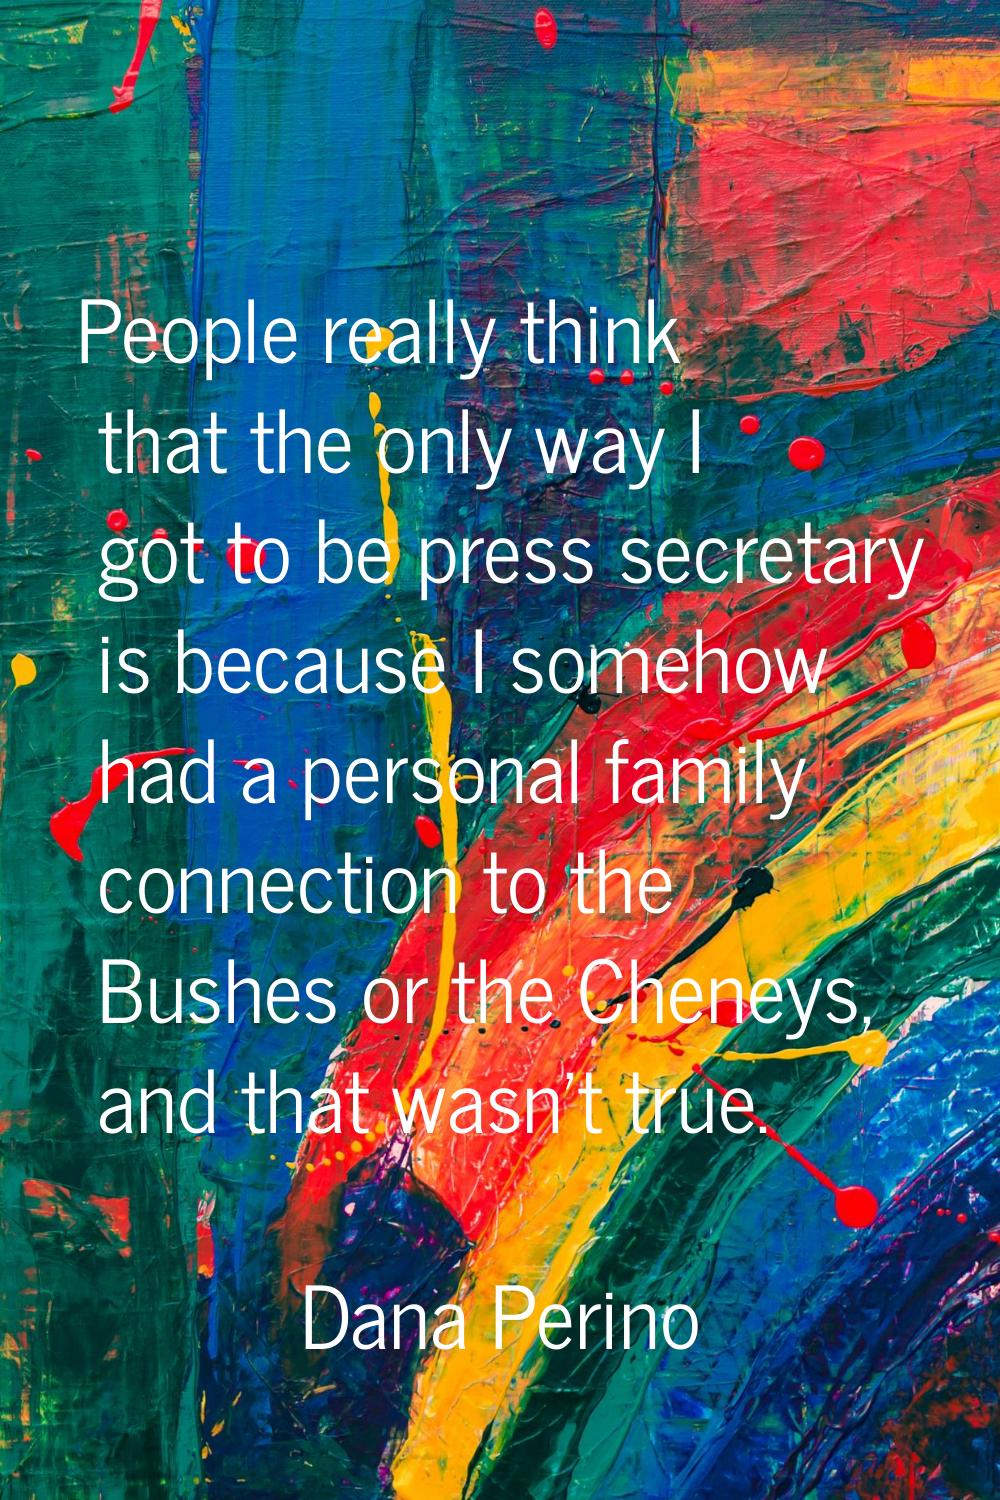 People really think that the only way I got to be press secretary is because I somehow had a person